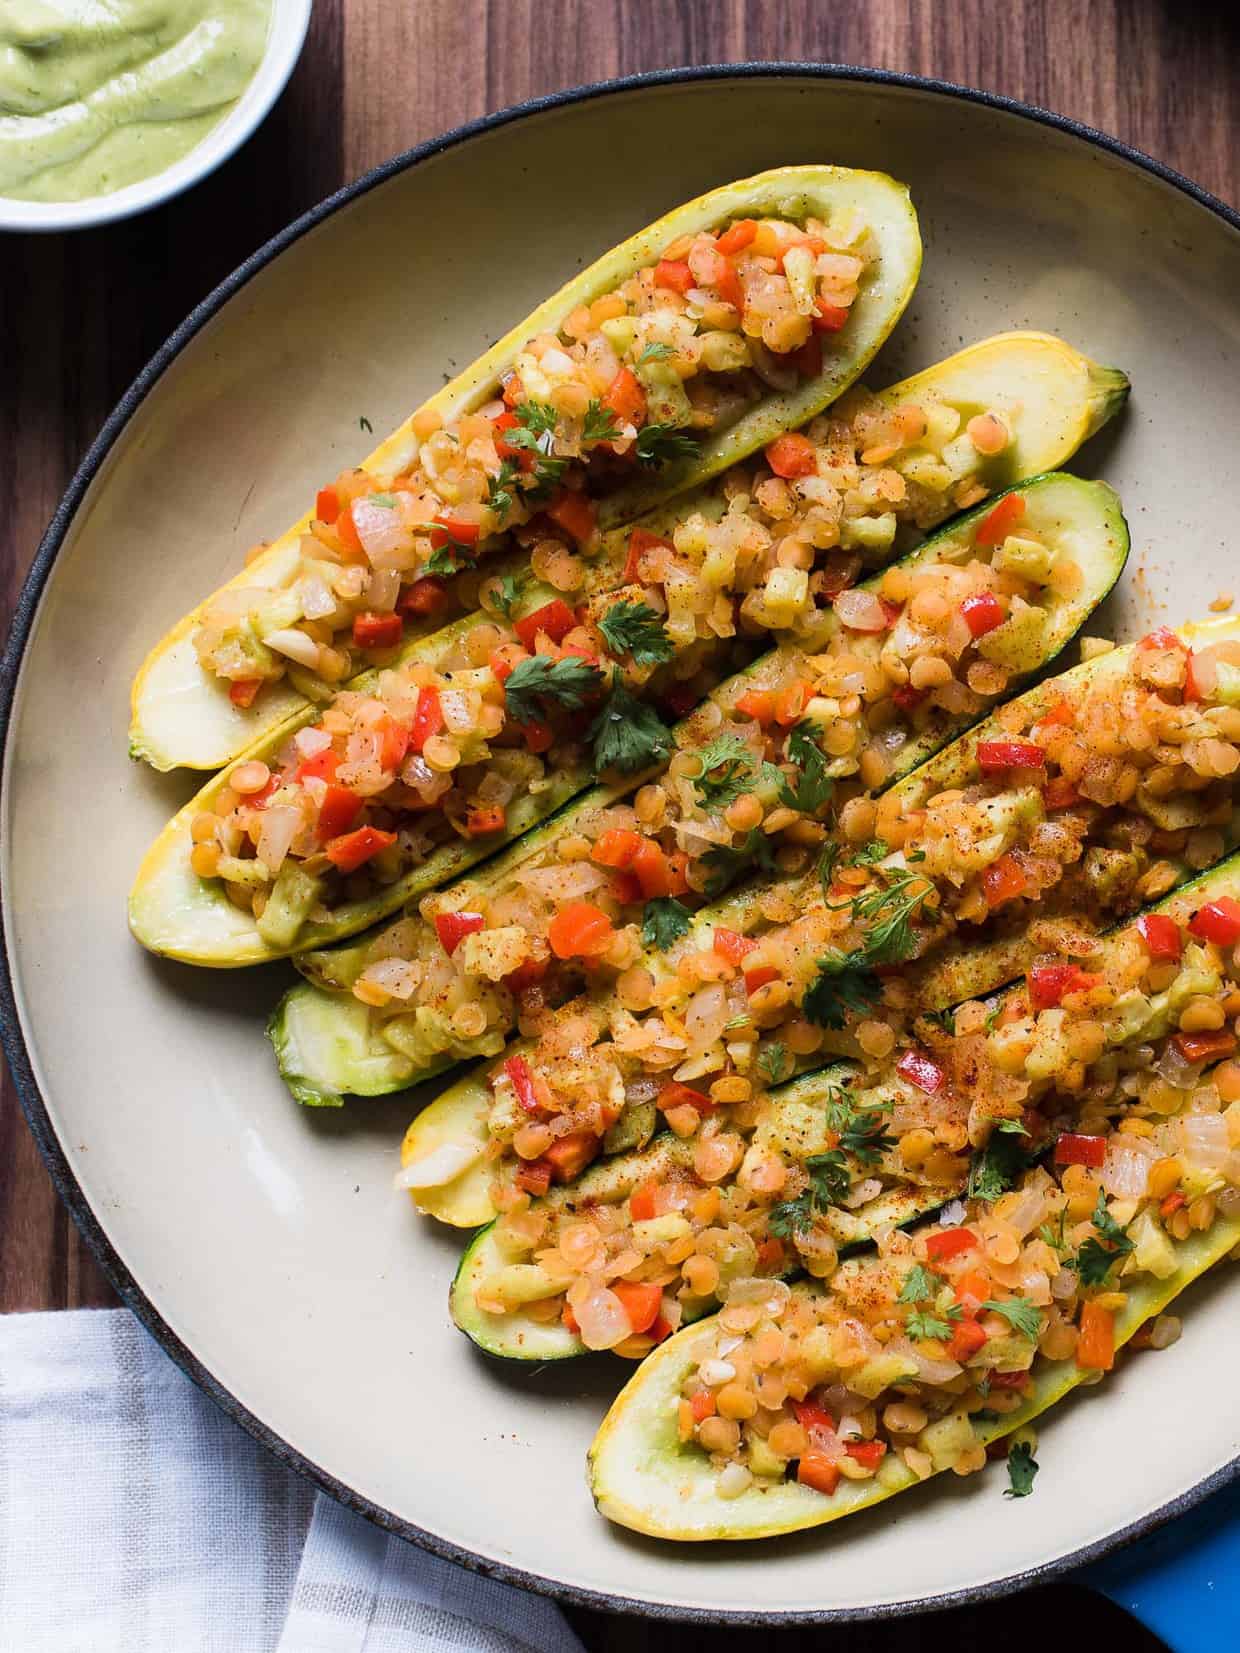 Stuffed yellow squash and zucchini with a tasty lentil filling in a shallow pan.